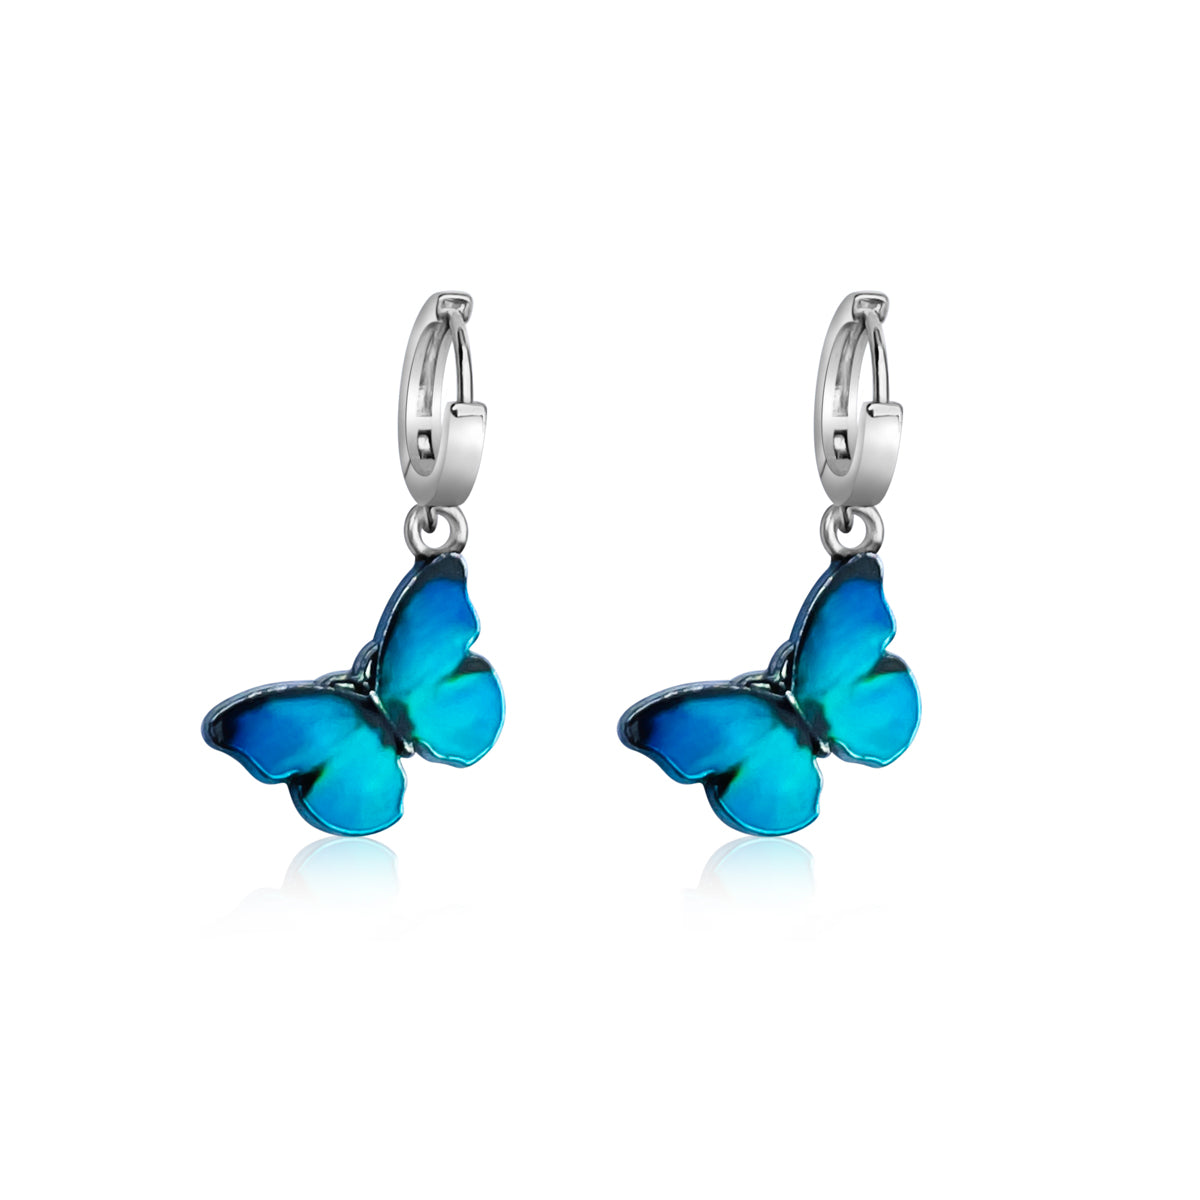 Let the "Joyful Butterfly Dance Earrings" be your mindful companions, encouraging you to dance through life with the carefree spirit of a butterfly. 